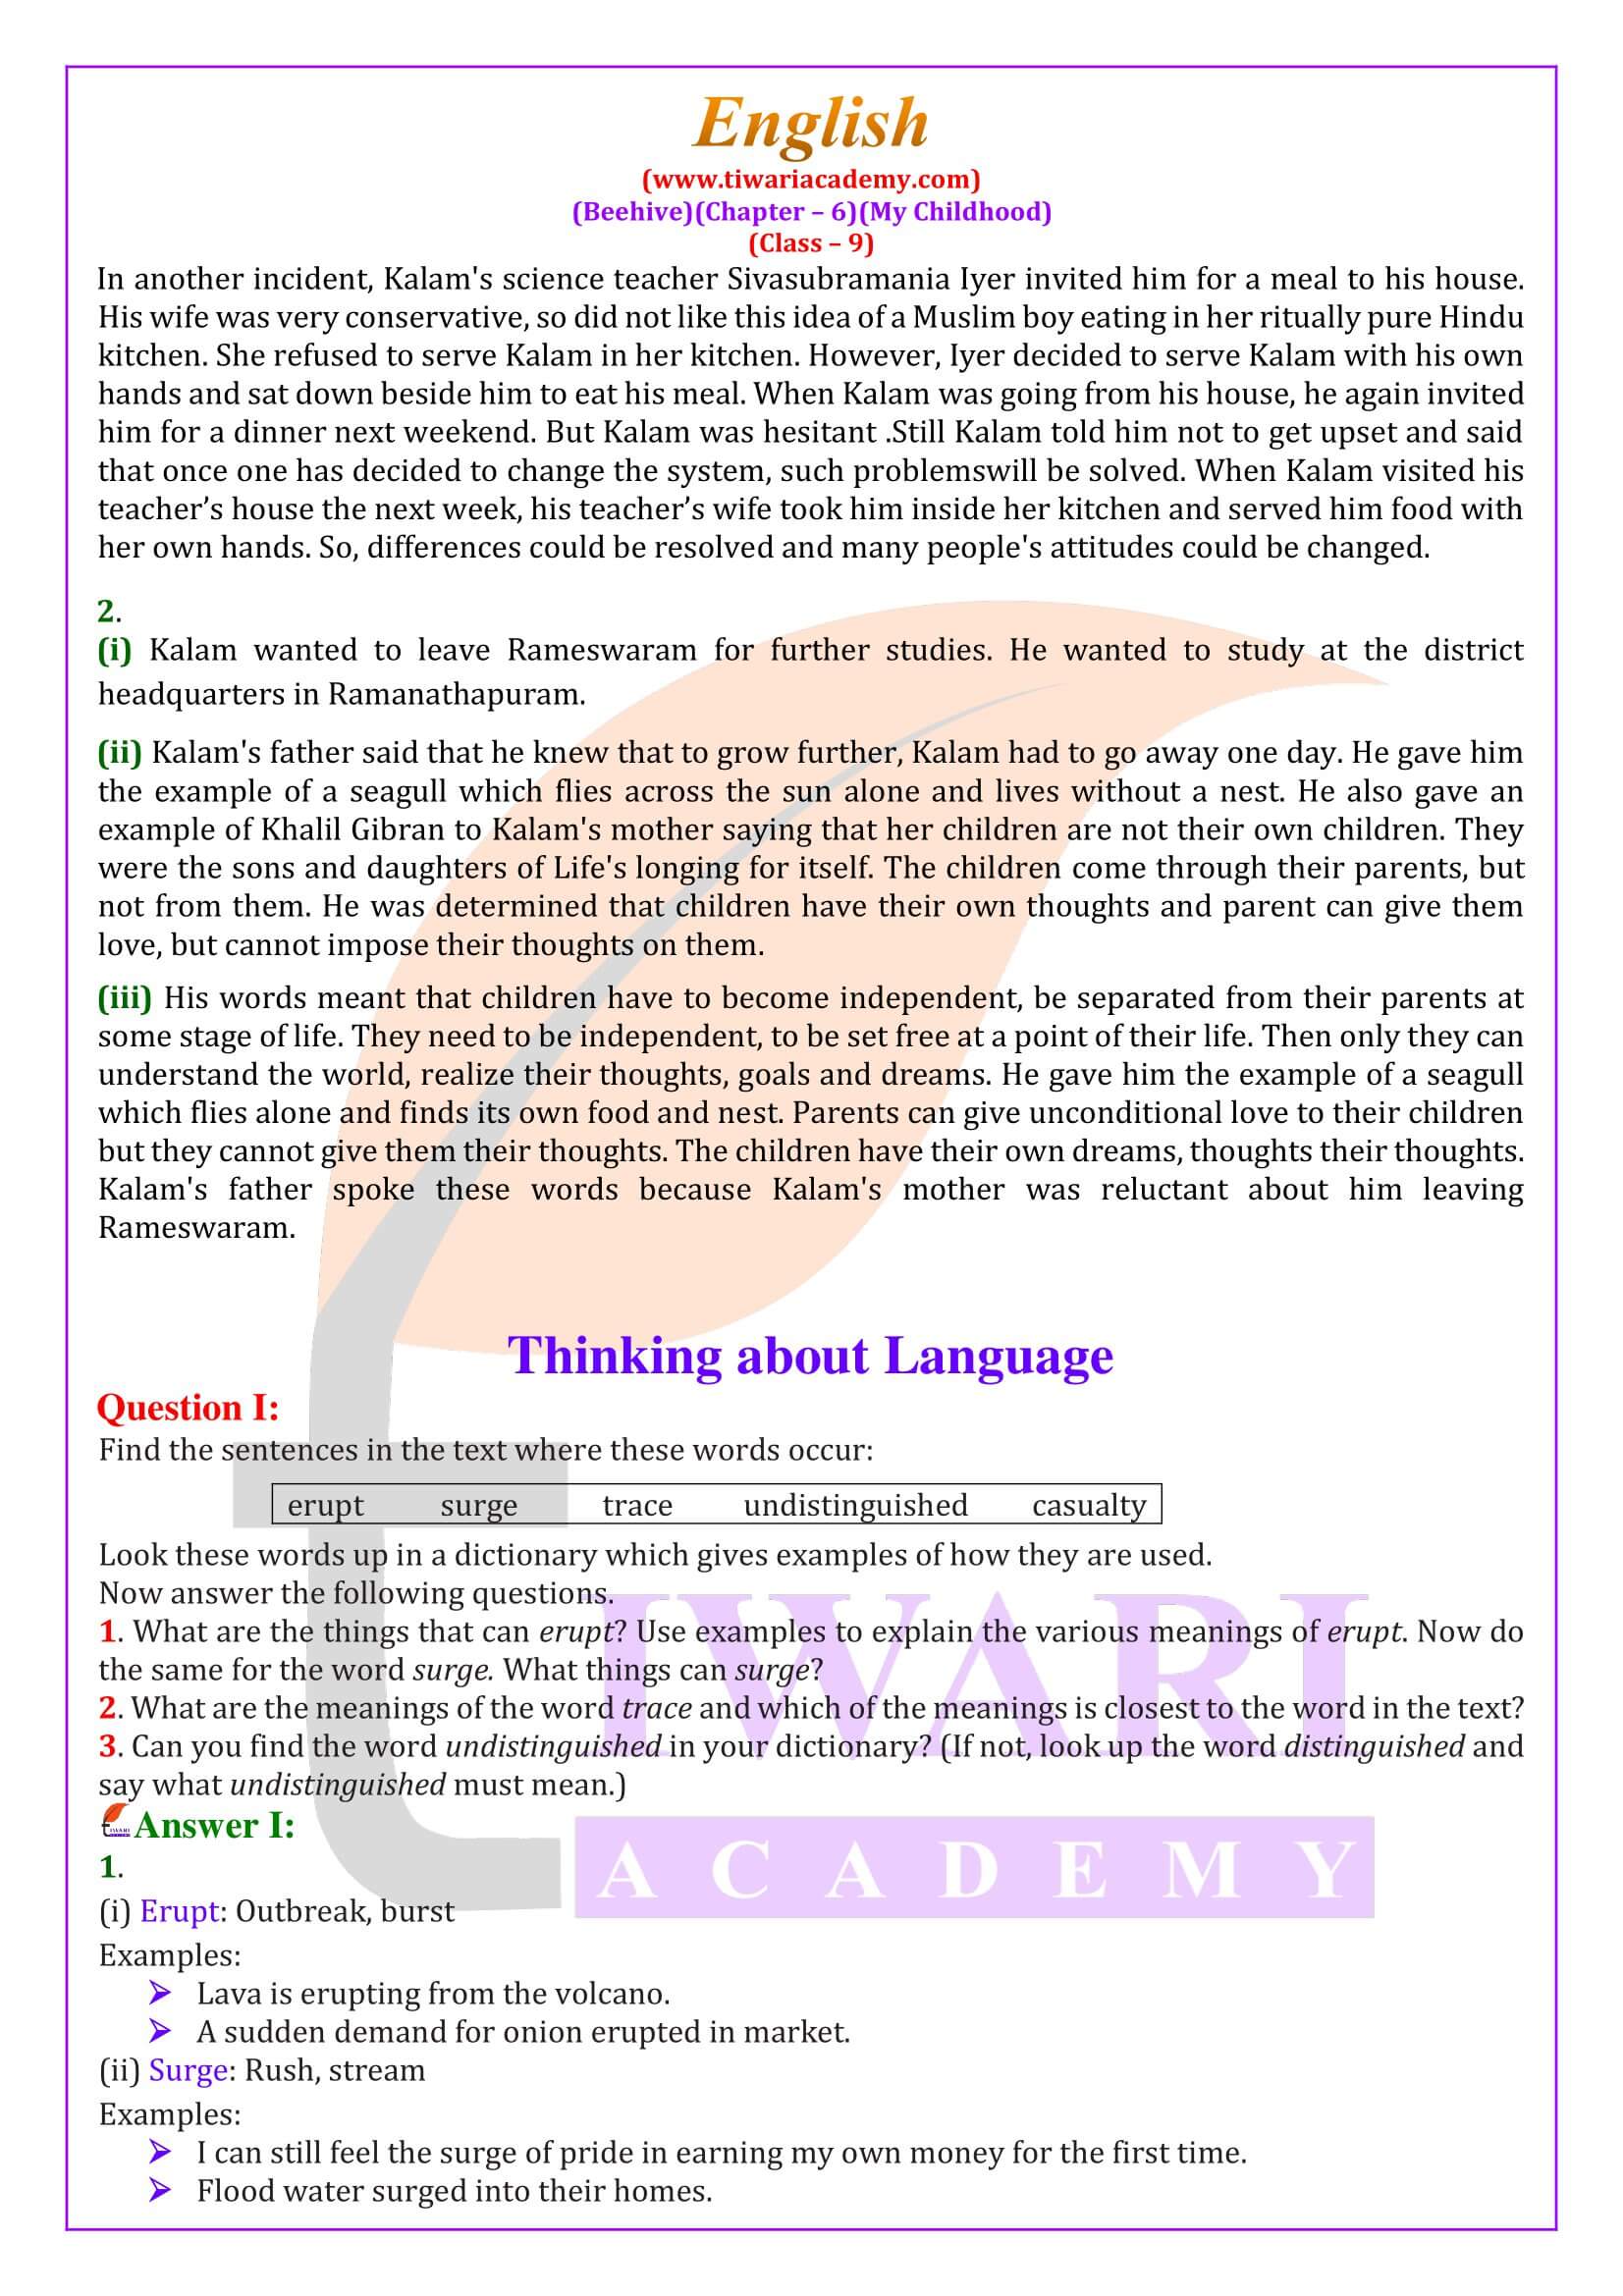 NCERT Class 9 English Summary, Explanation, Question Answers